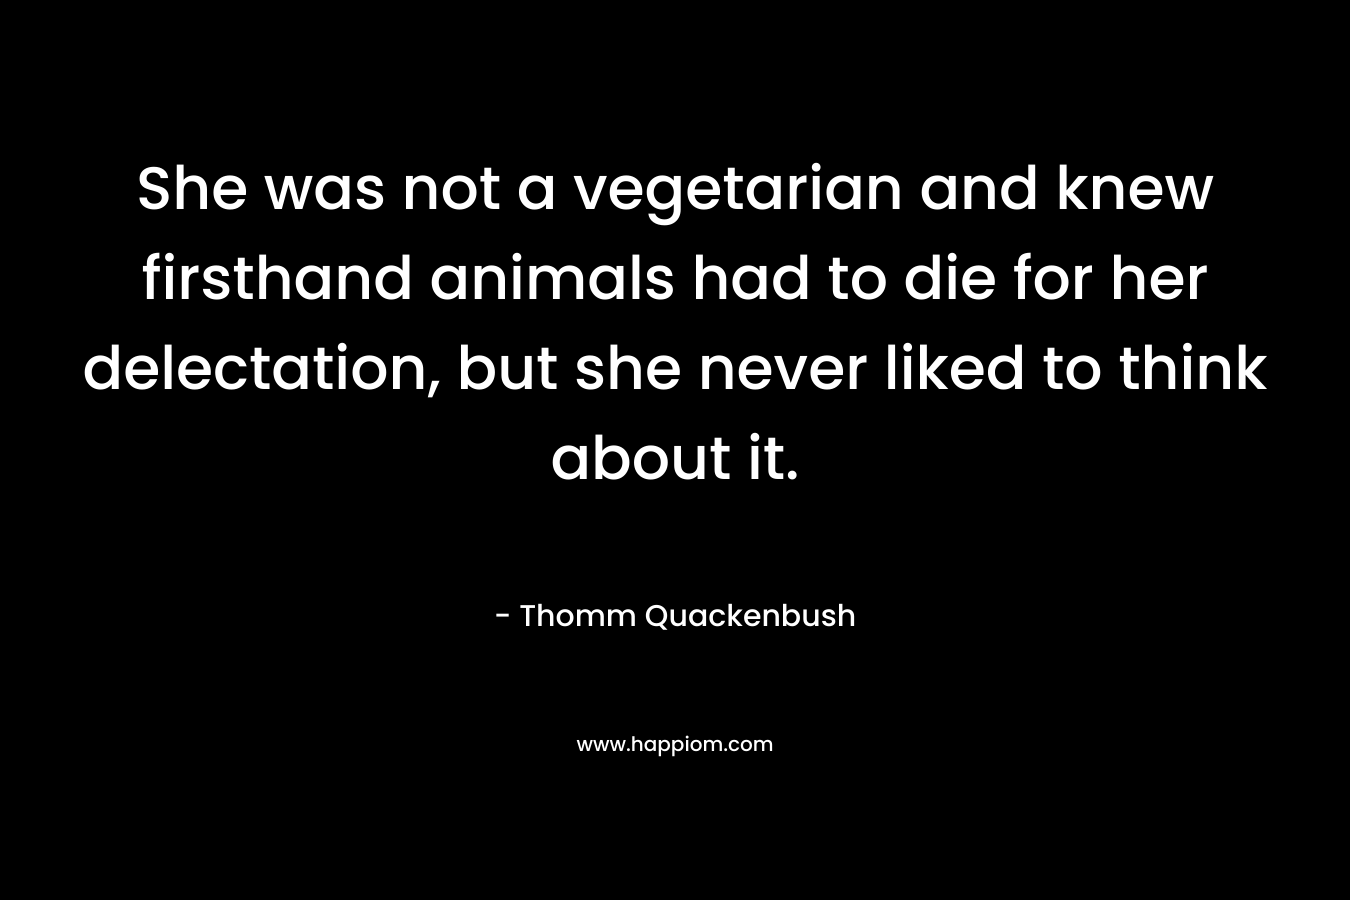 She was not a vegetarian and knew firsthand animals had to die for her delectation, but she never liked to think about it.